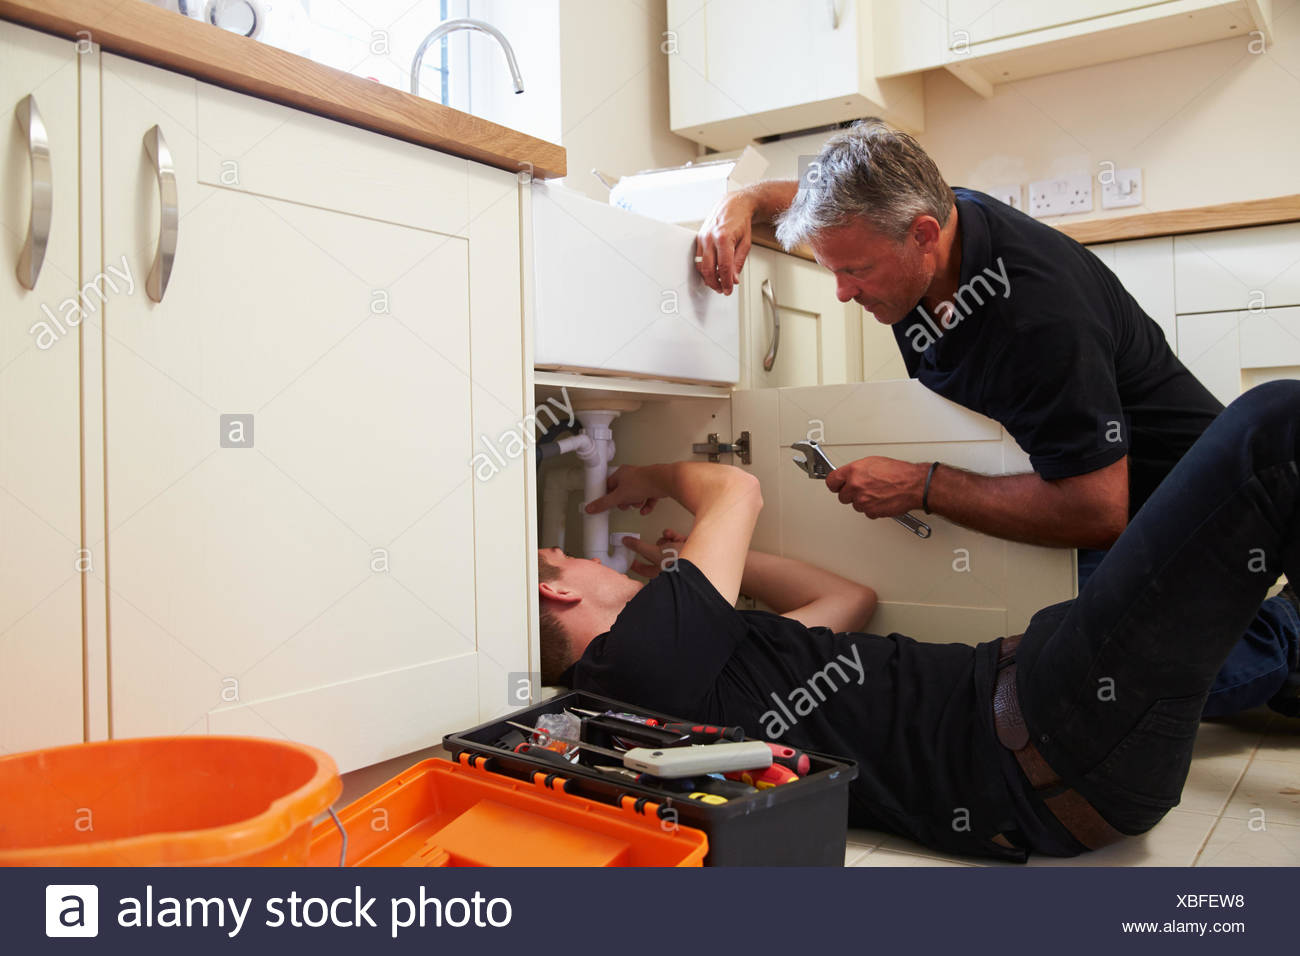 Plumber Teaching A Young Apprentice To Fix A Kitchen Sink